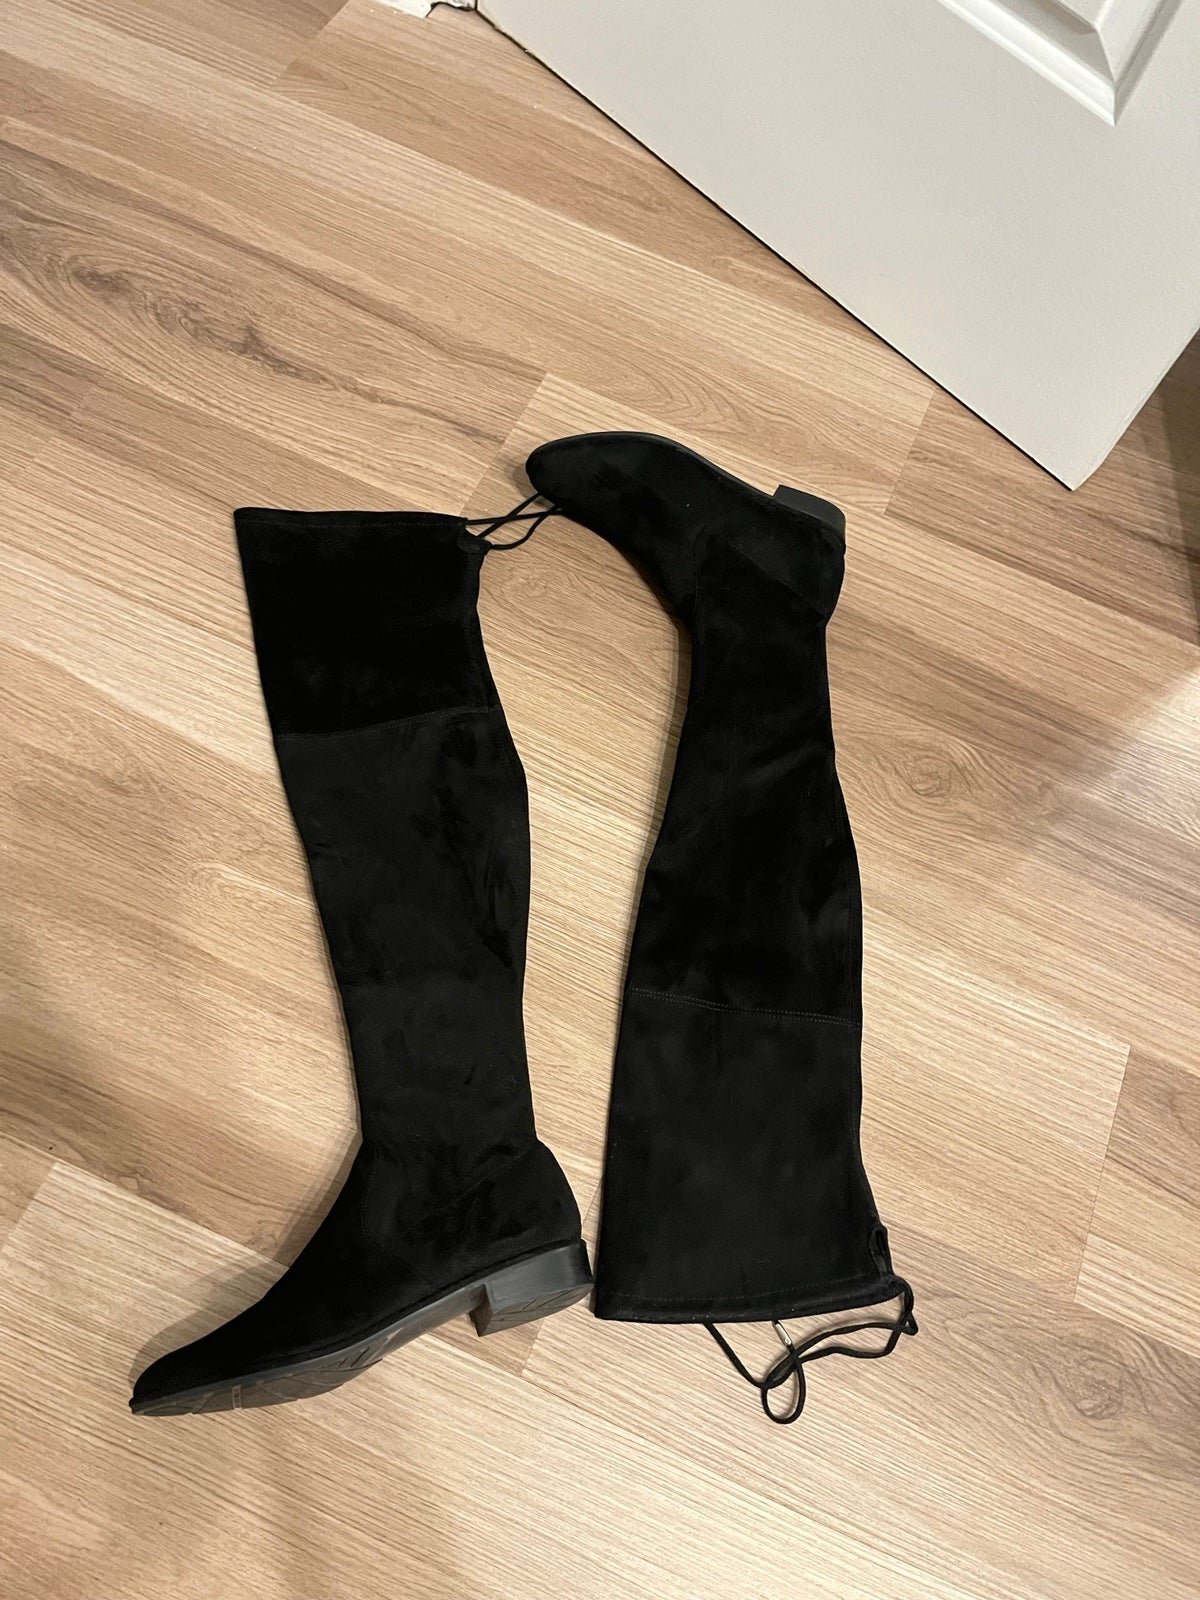 marc fisher over the knee boots DVmMytKci